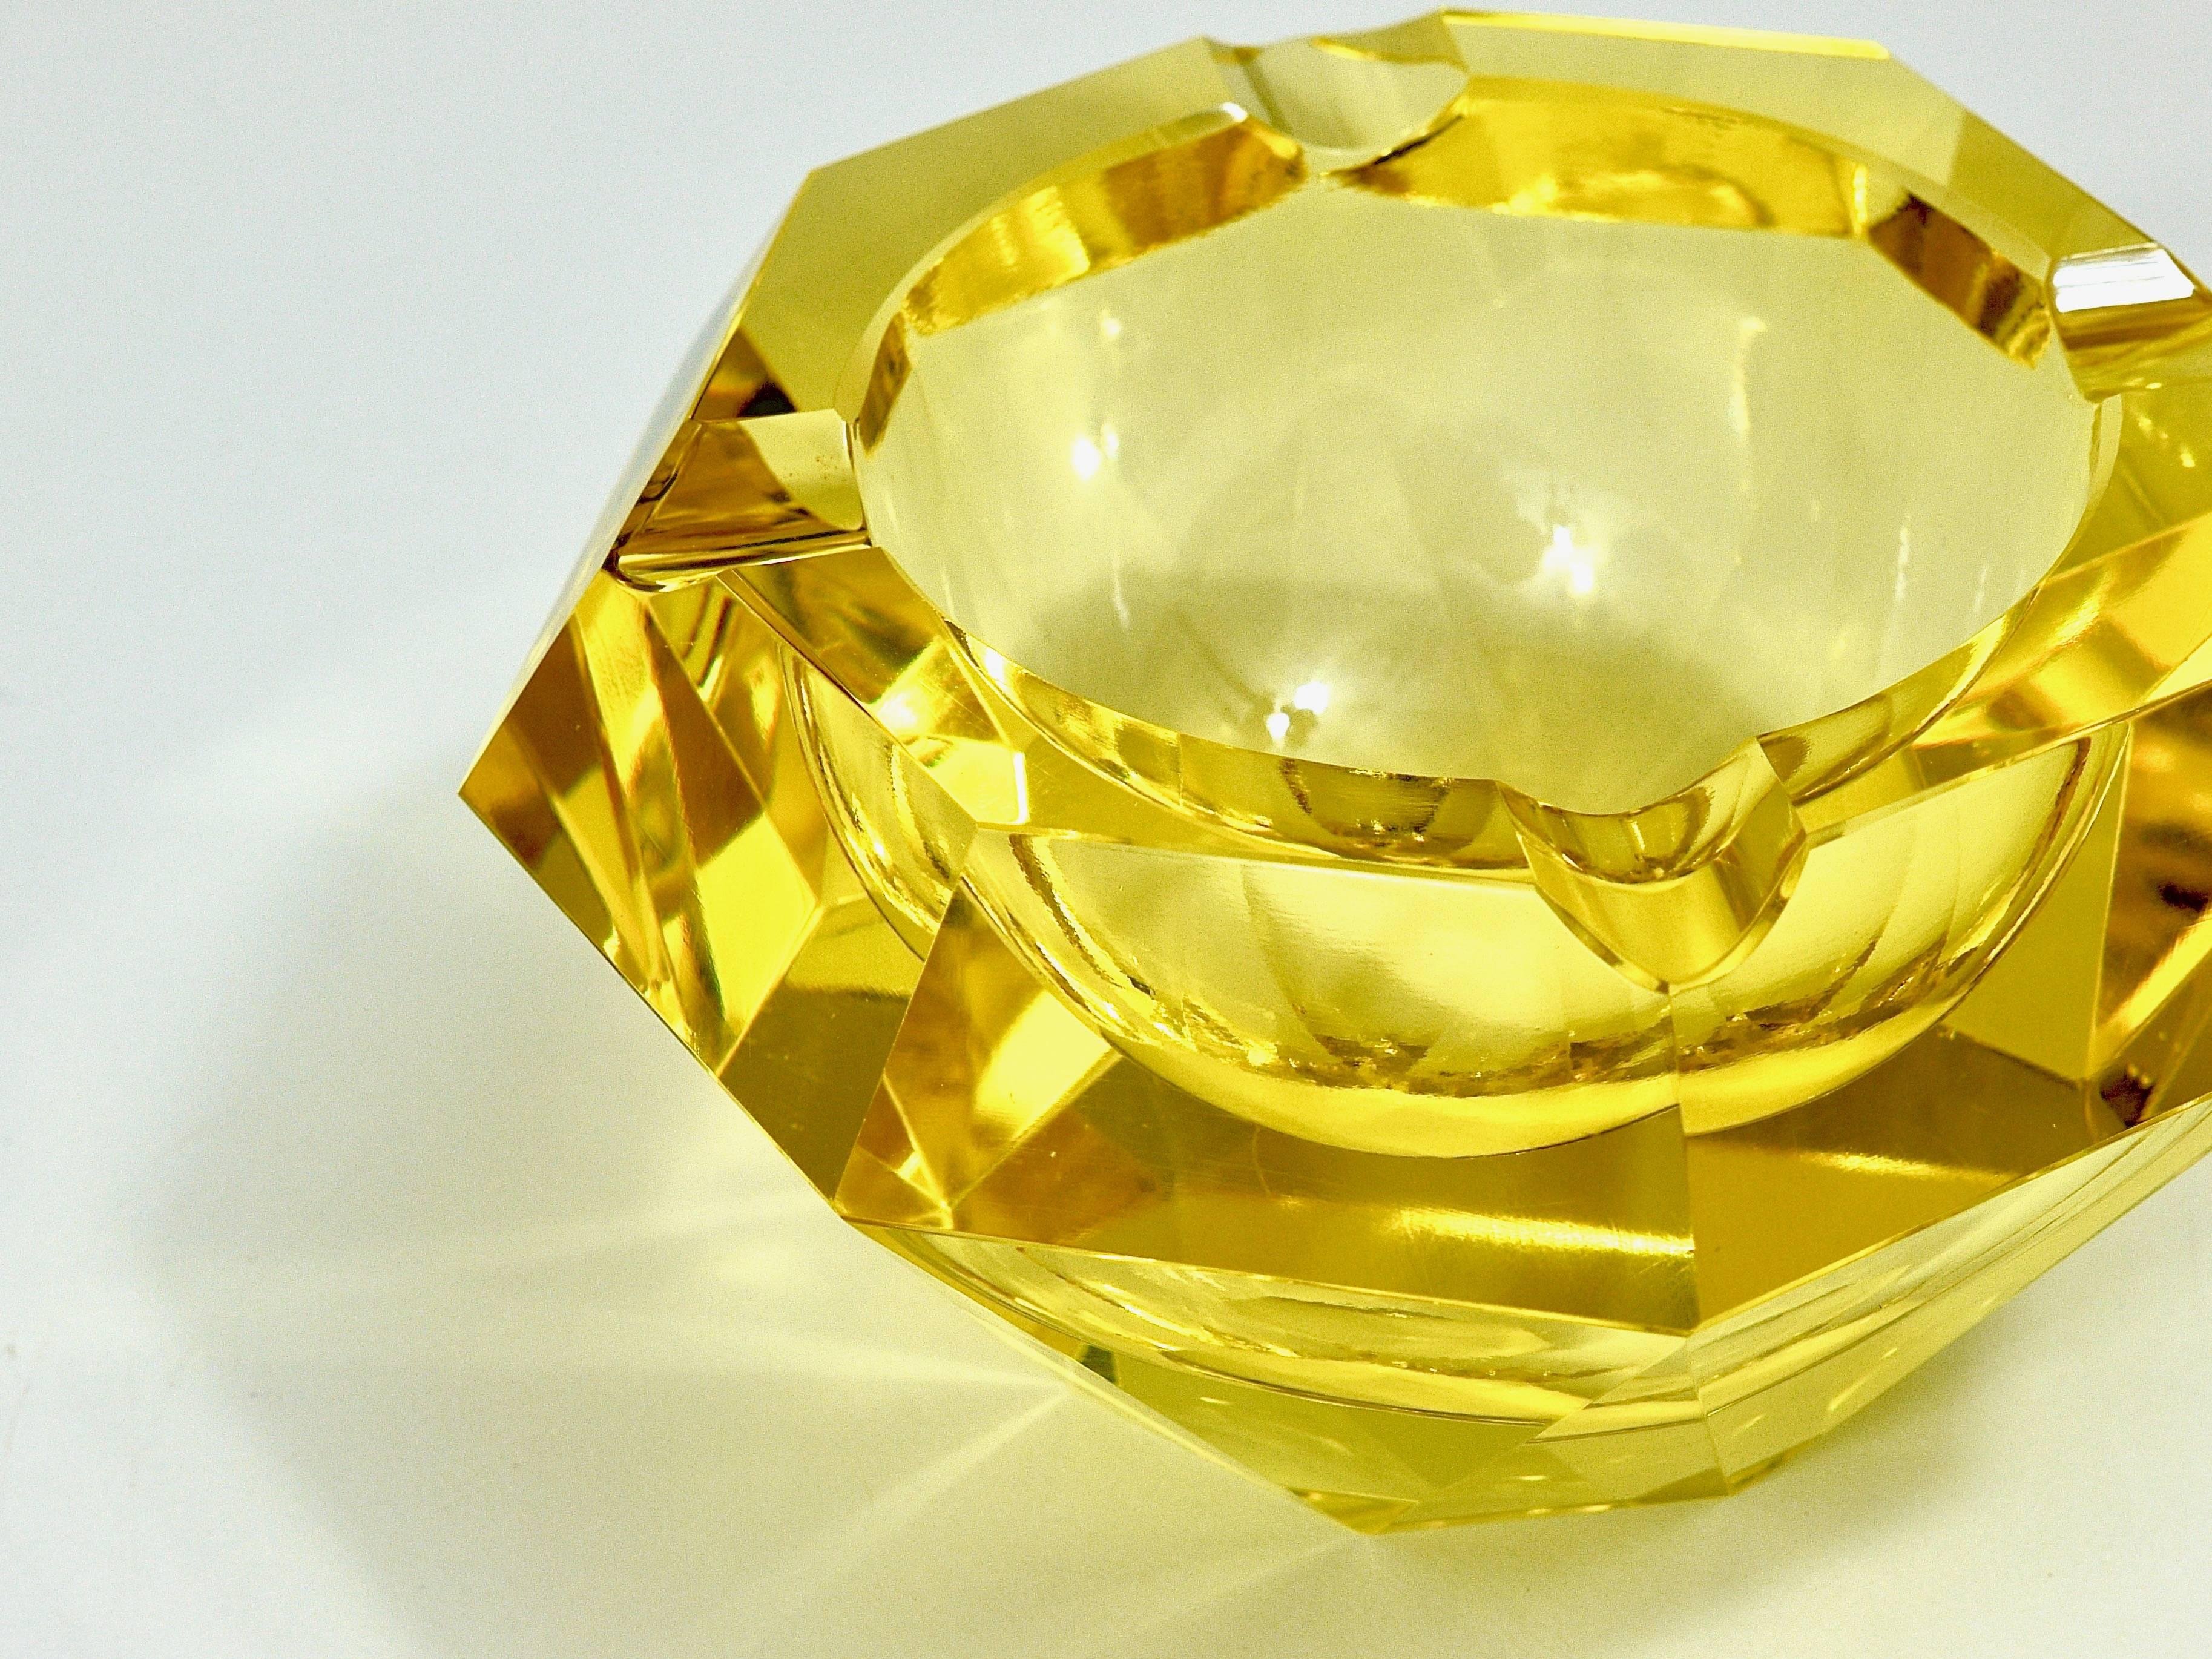 A beautiful faceted ashtray in diamond-shape, made of yellow Murano glass in Italy in the 1930s. In excellent condition, a showcase piece.